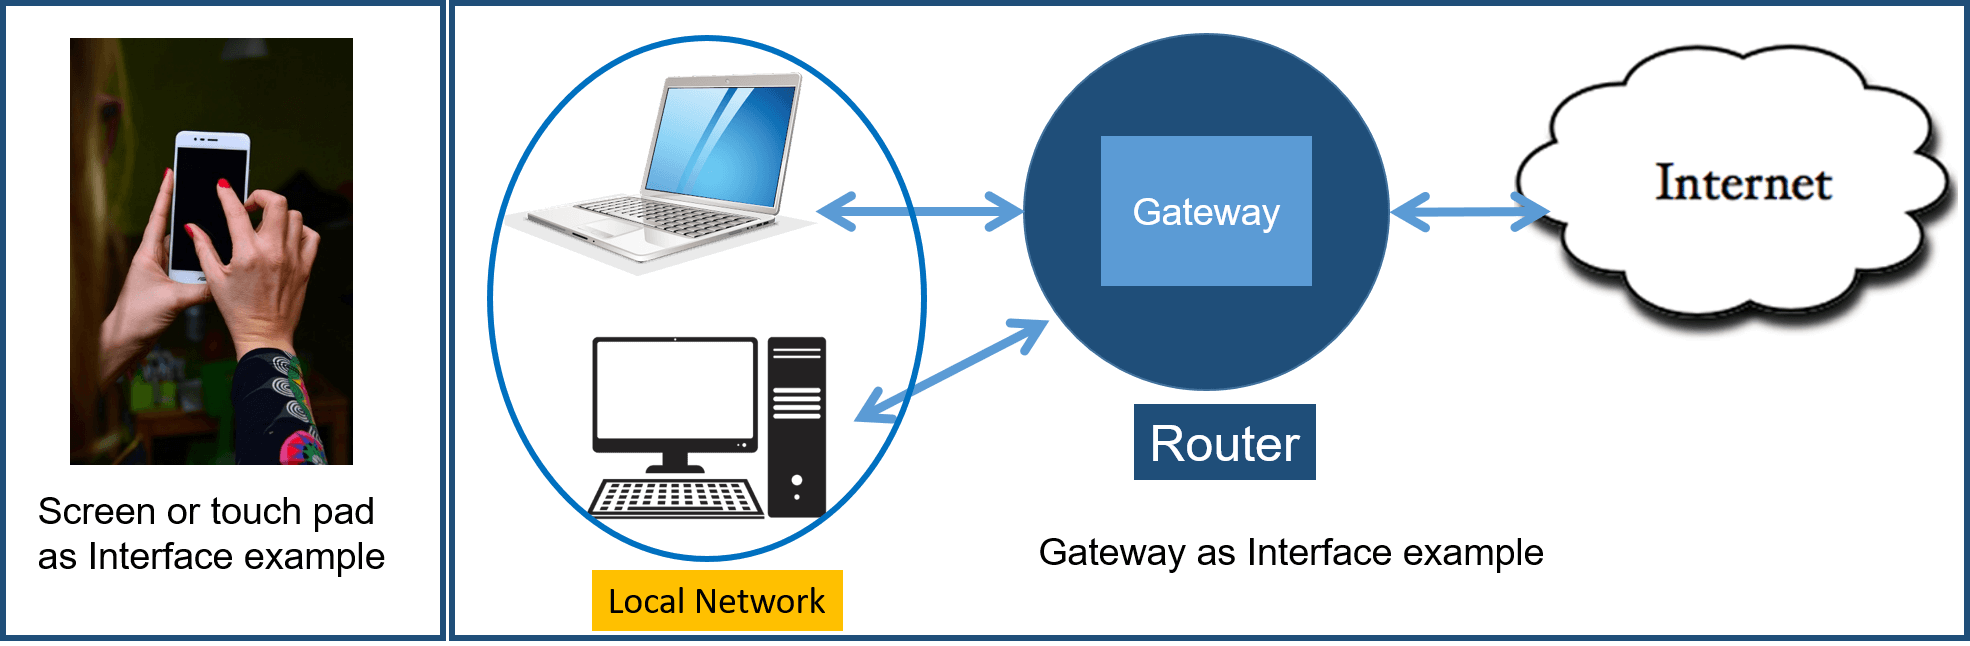 What is gateway in networking